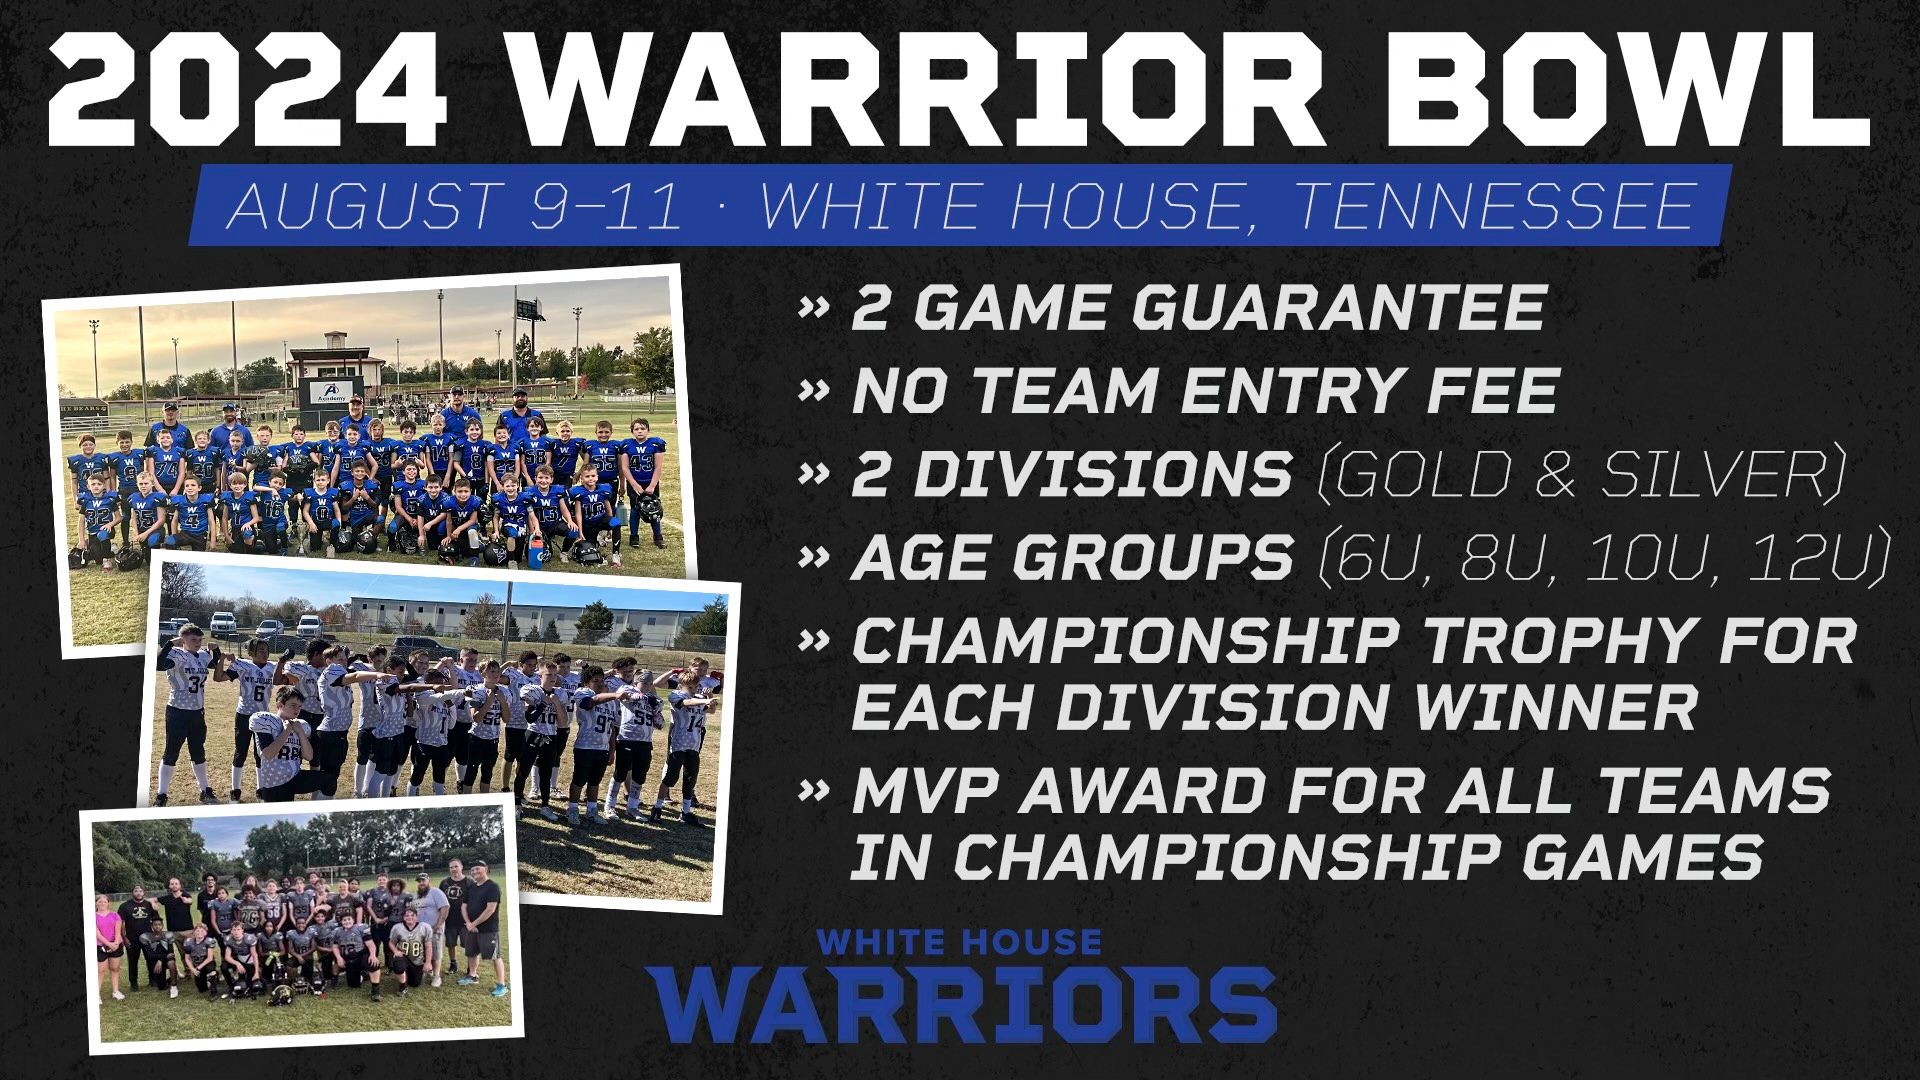 An advertisement for the 2024 warrior bowl